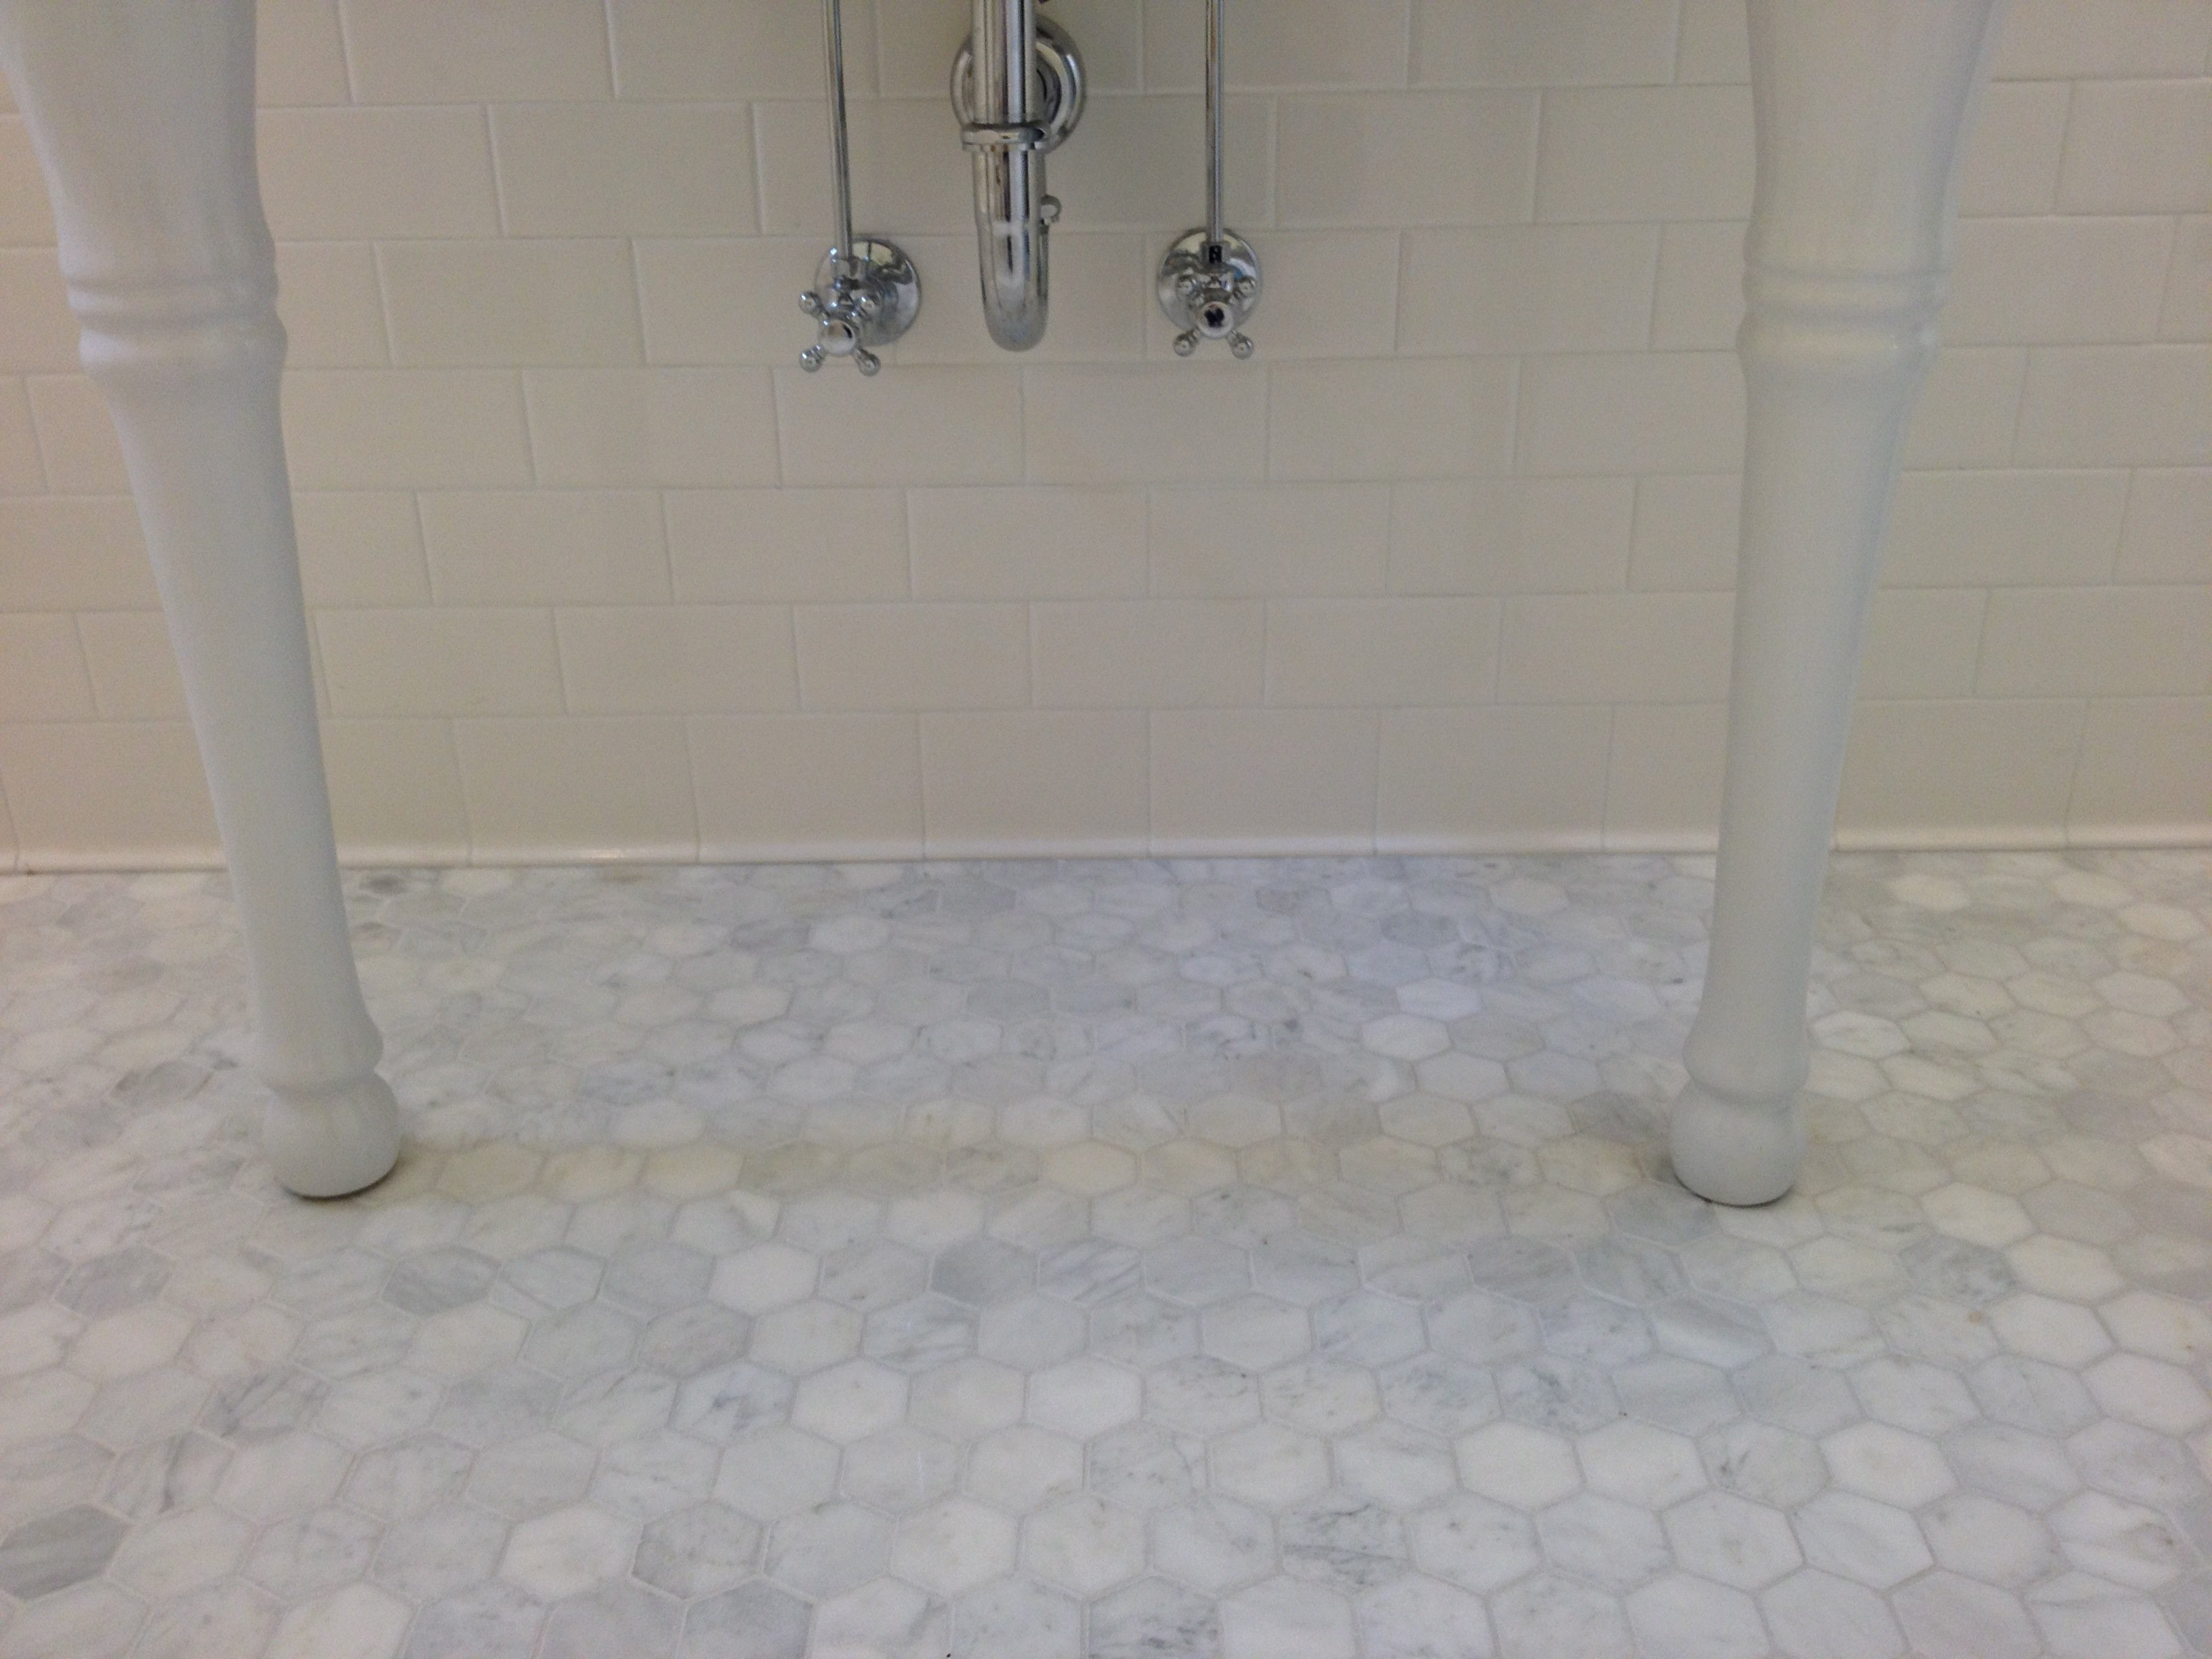 Small Or Larger Hexagon Tile In 1920 Bathroom Tile Layer Pro pertaining to dimensions 3264 X 2448